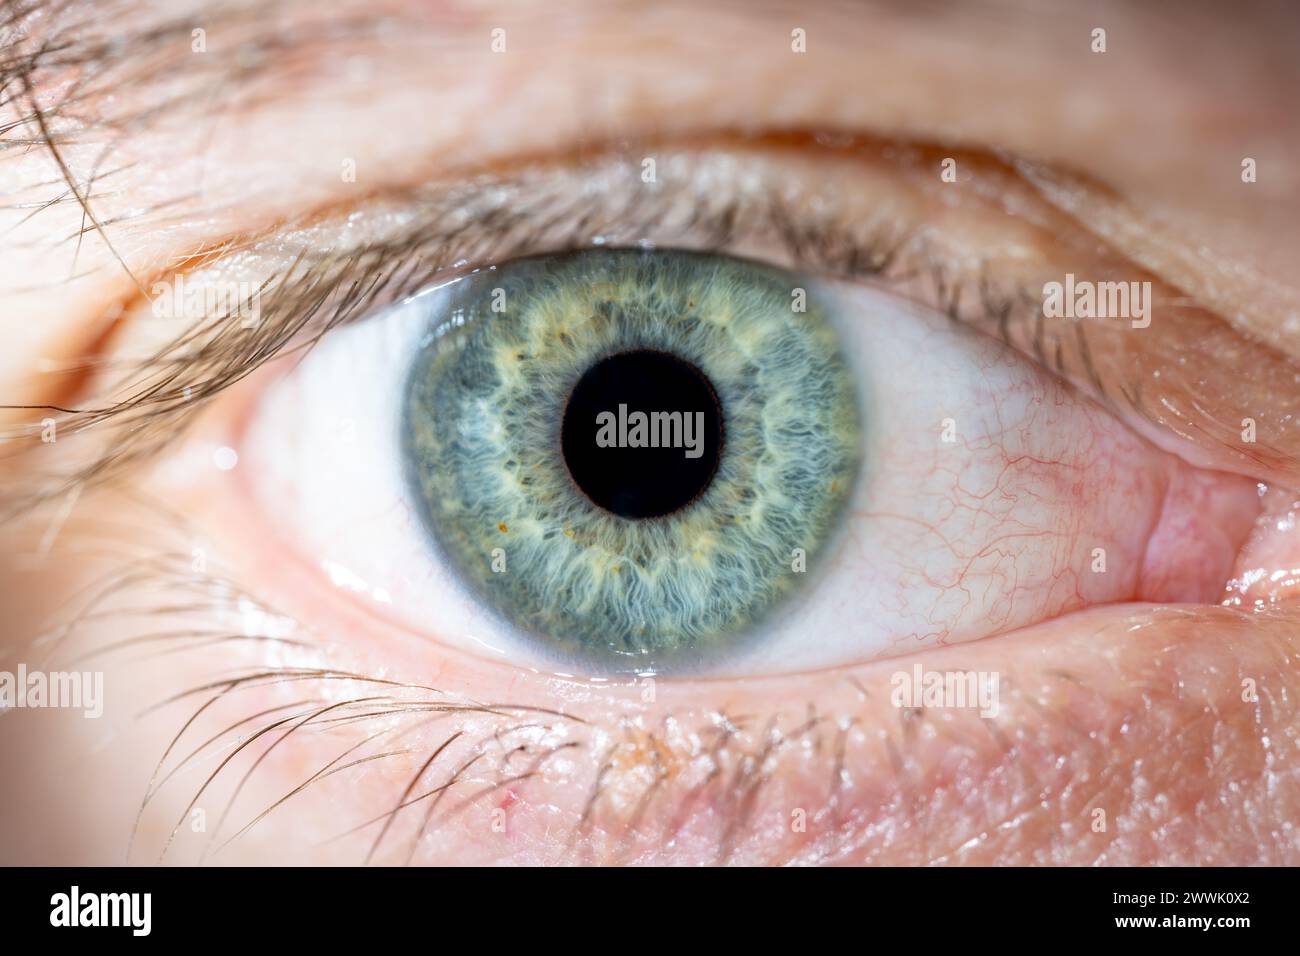 Description: Male Blue-Green Colored Eye With Lashes. Pupil opened. Close Up. Structural Anatomy. Human Iris Macro Detail. Stock Photo